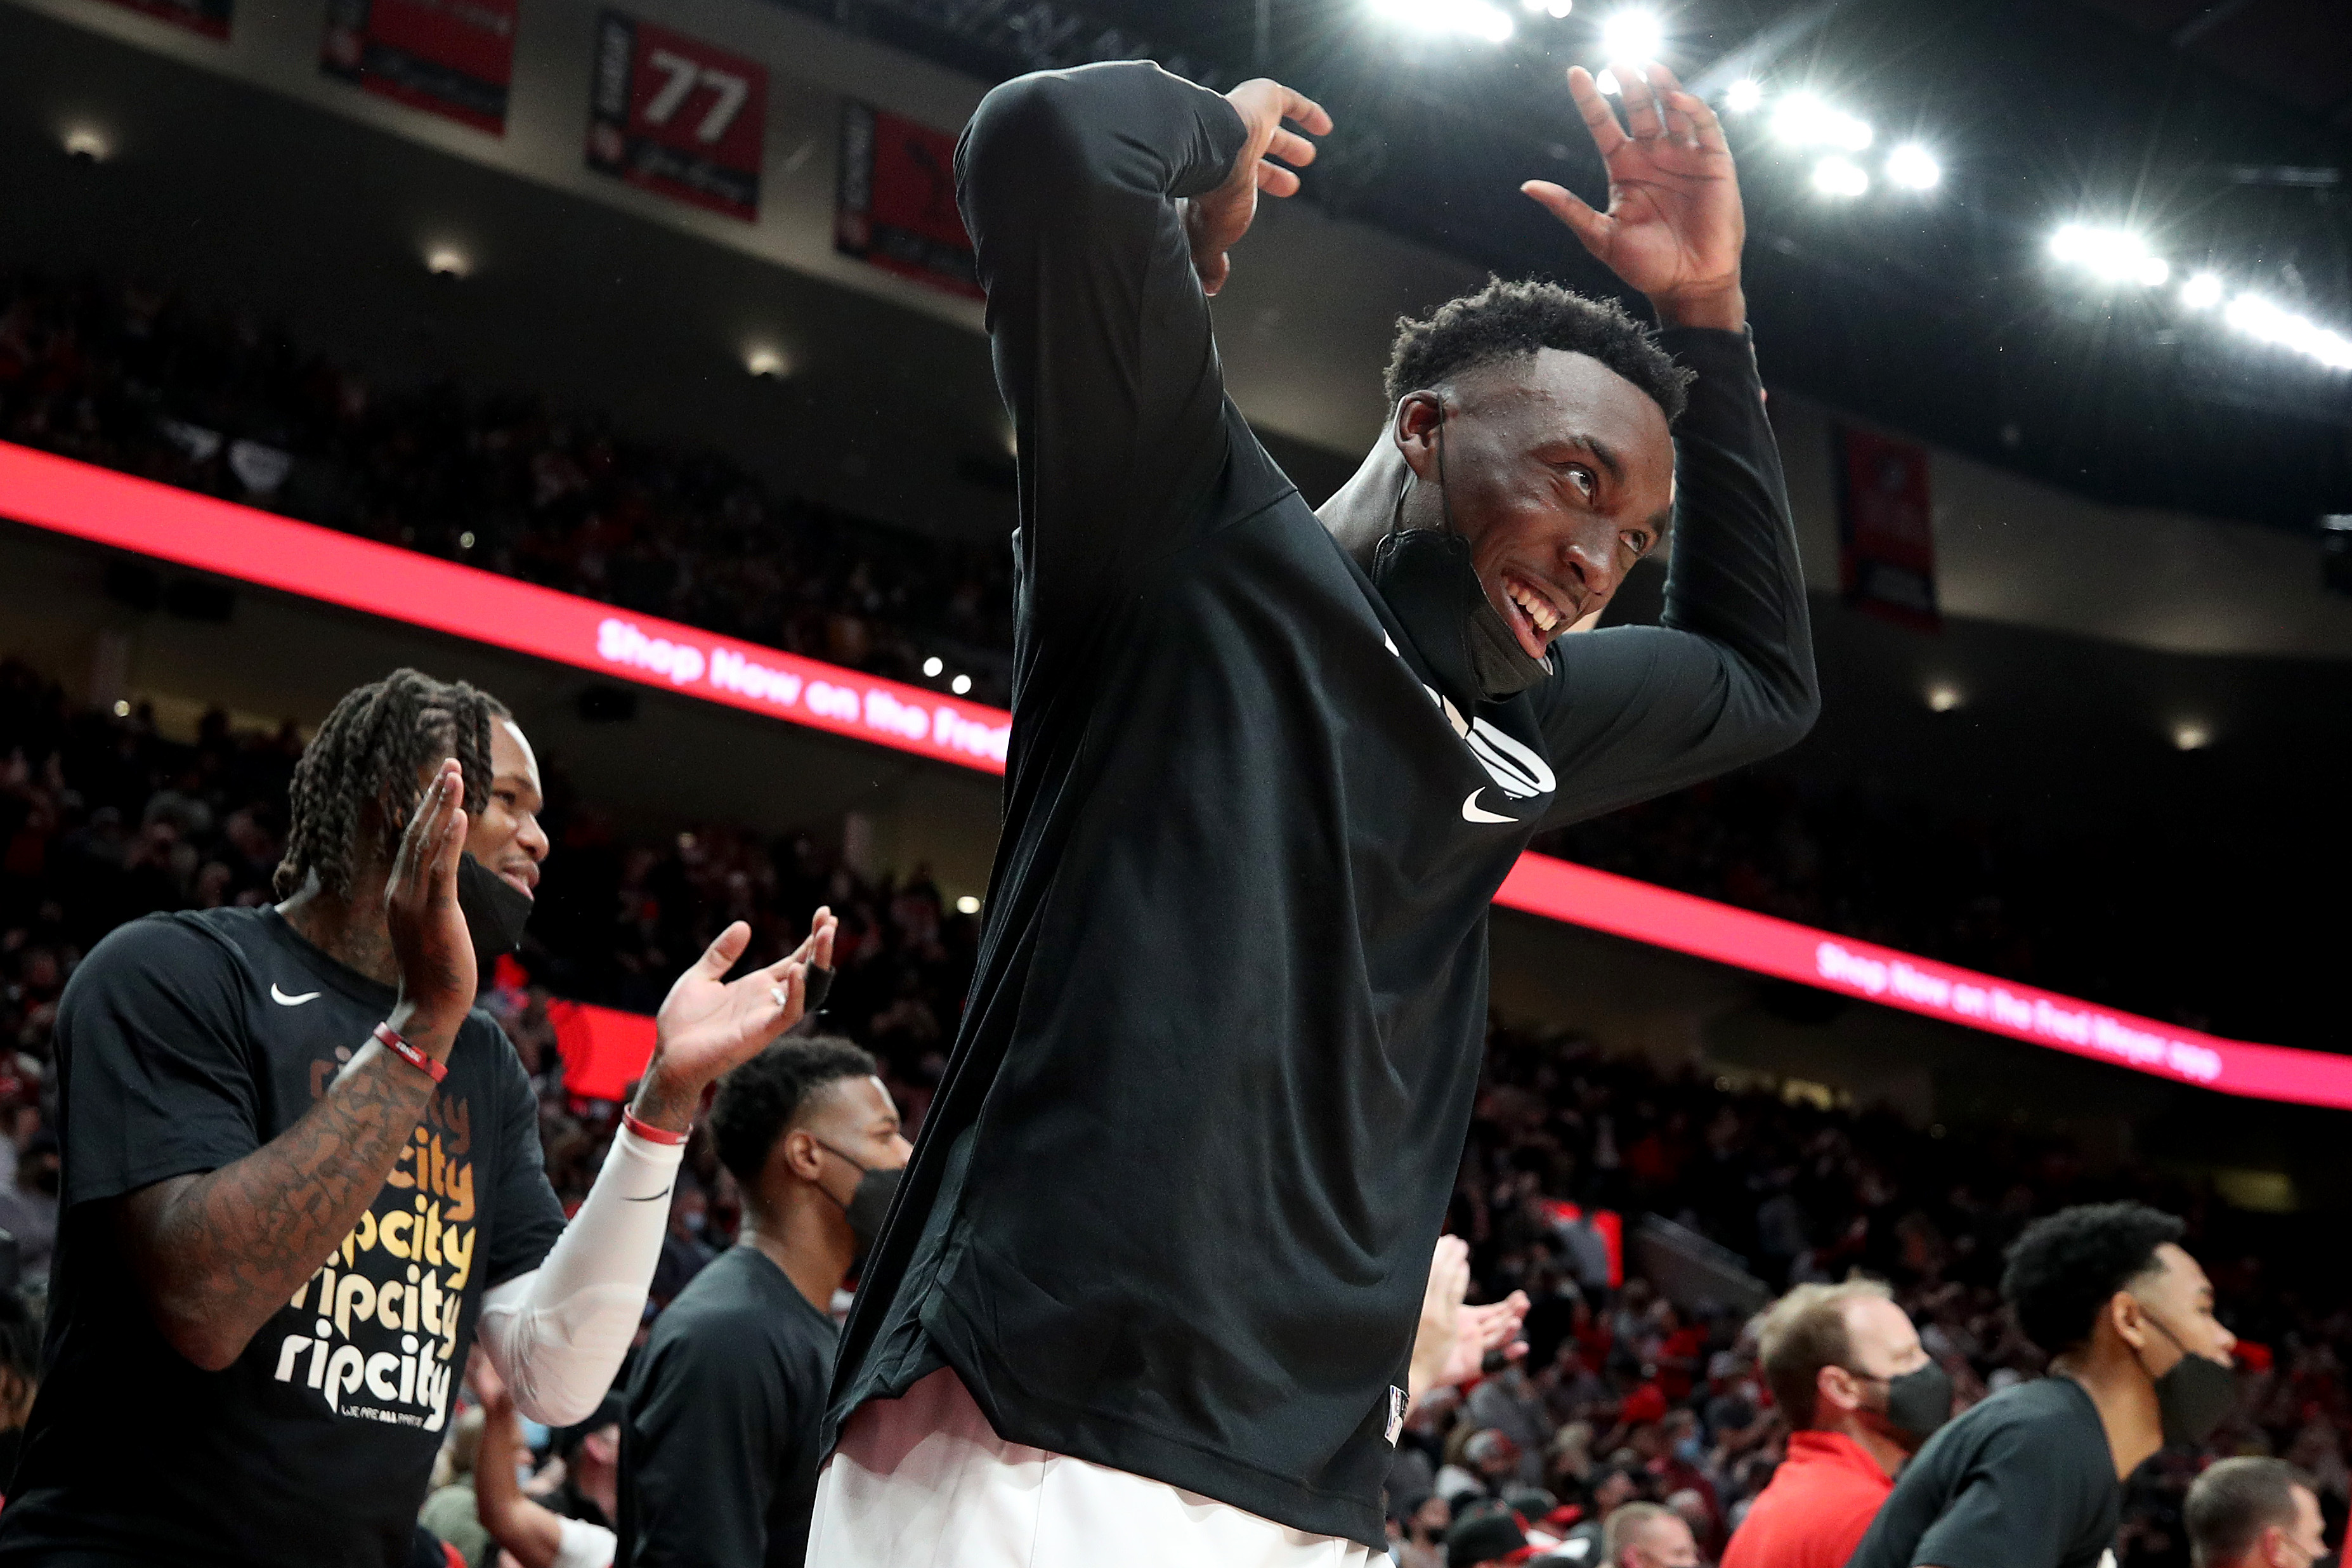 PORTLAND, OREGON - OCTOBER 20: Nassir Little #9 of the Portland Trail Blazers reacts during the fourth quarter against the Sacramento Kings at Moda Center on October 20, 2021 in Portland, Oregon. NOTE TO USER: User expressly acknowledges and agrees that, by downloading and or using this photograph, User is consenting to the terms and conditions of the Getty Images License Agreement. (Photo by Steph Chambers/Getty Images)